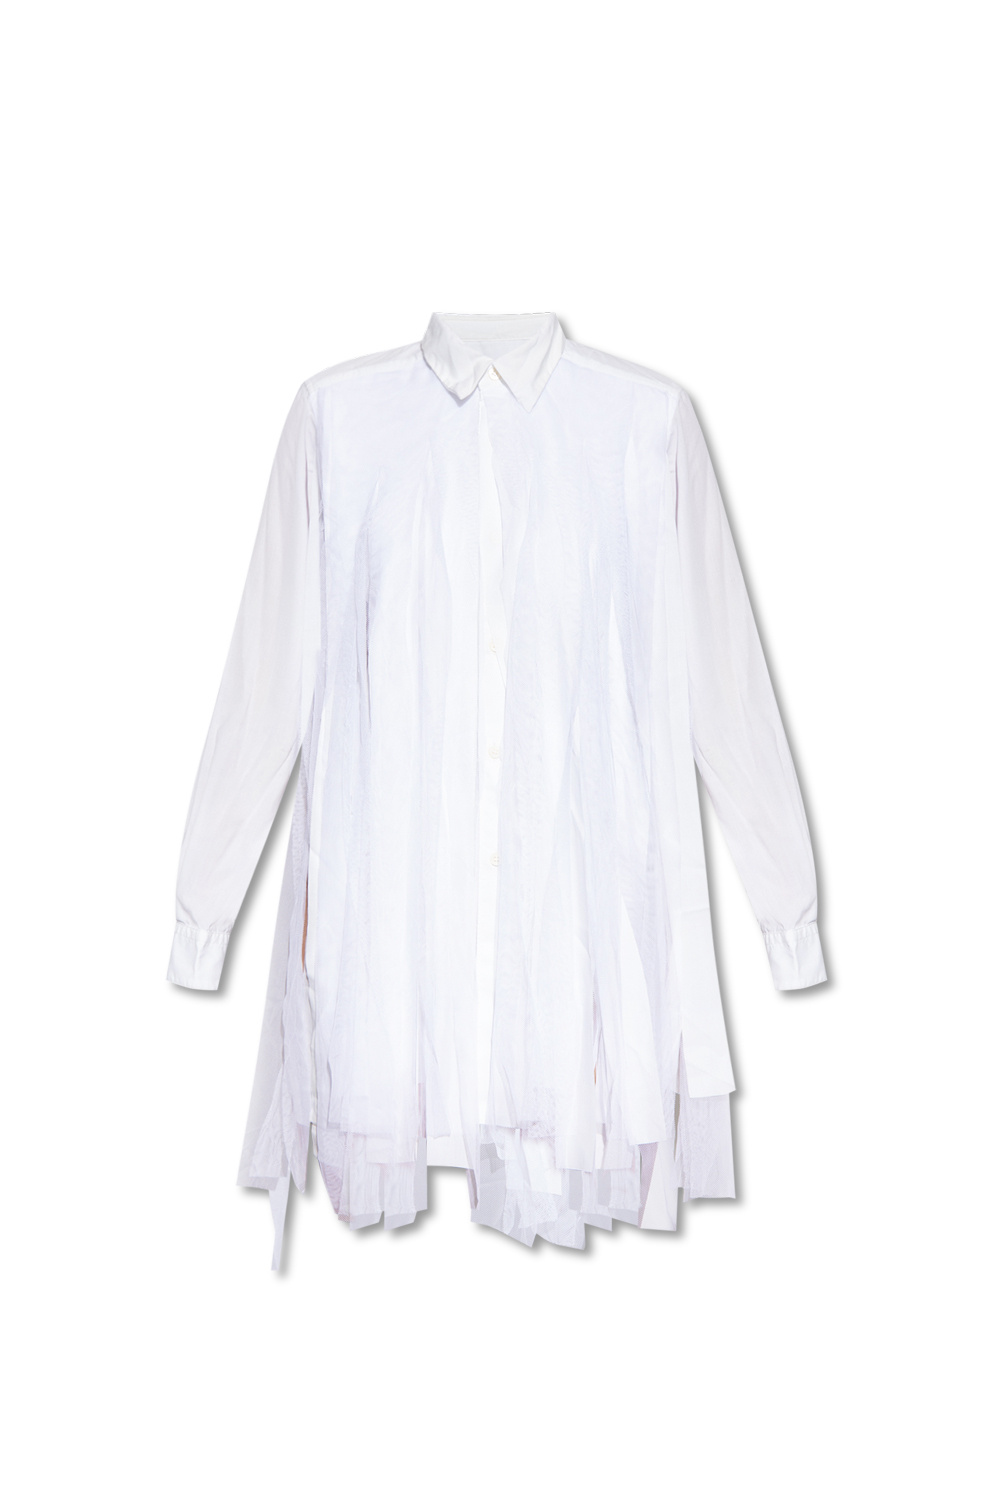 Comme des Garcons Pleats Tulle Jacket Second Hand / Selling